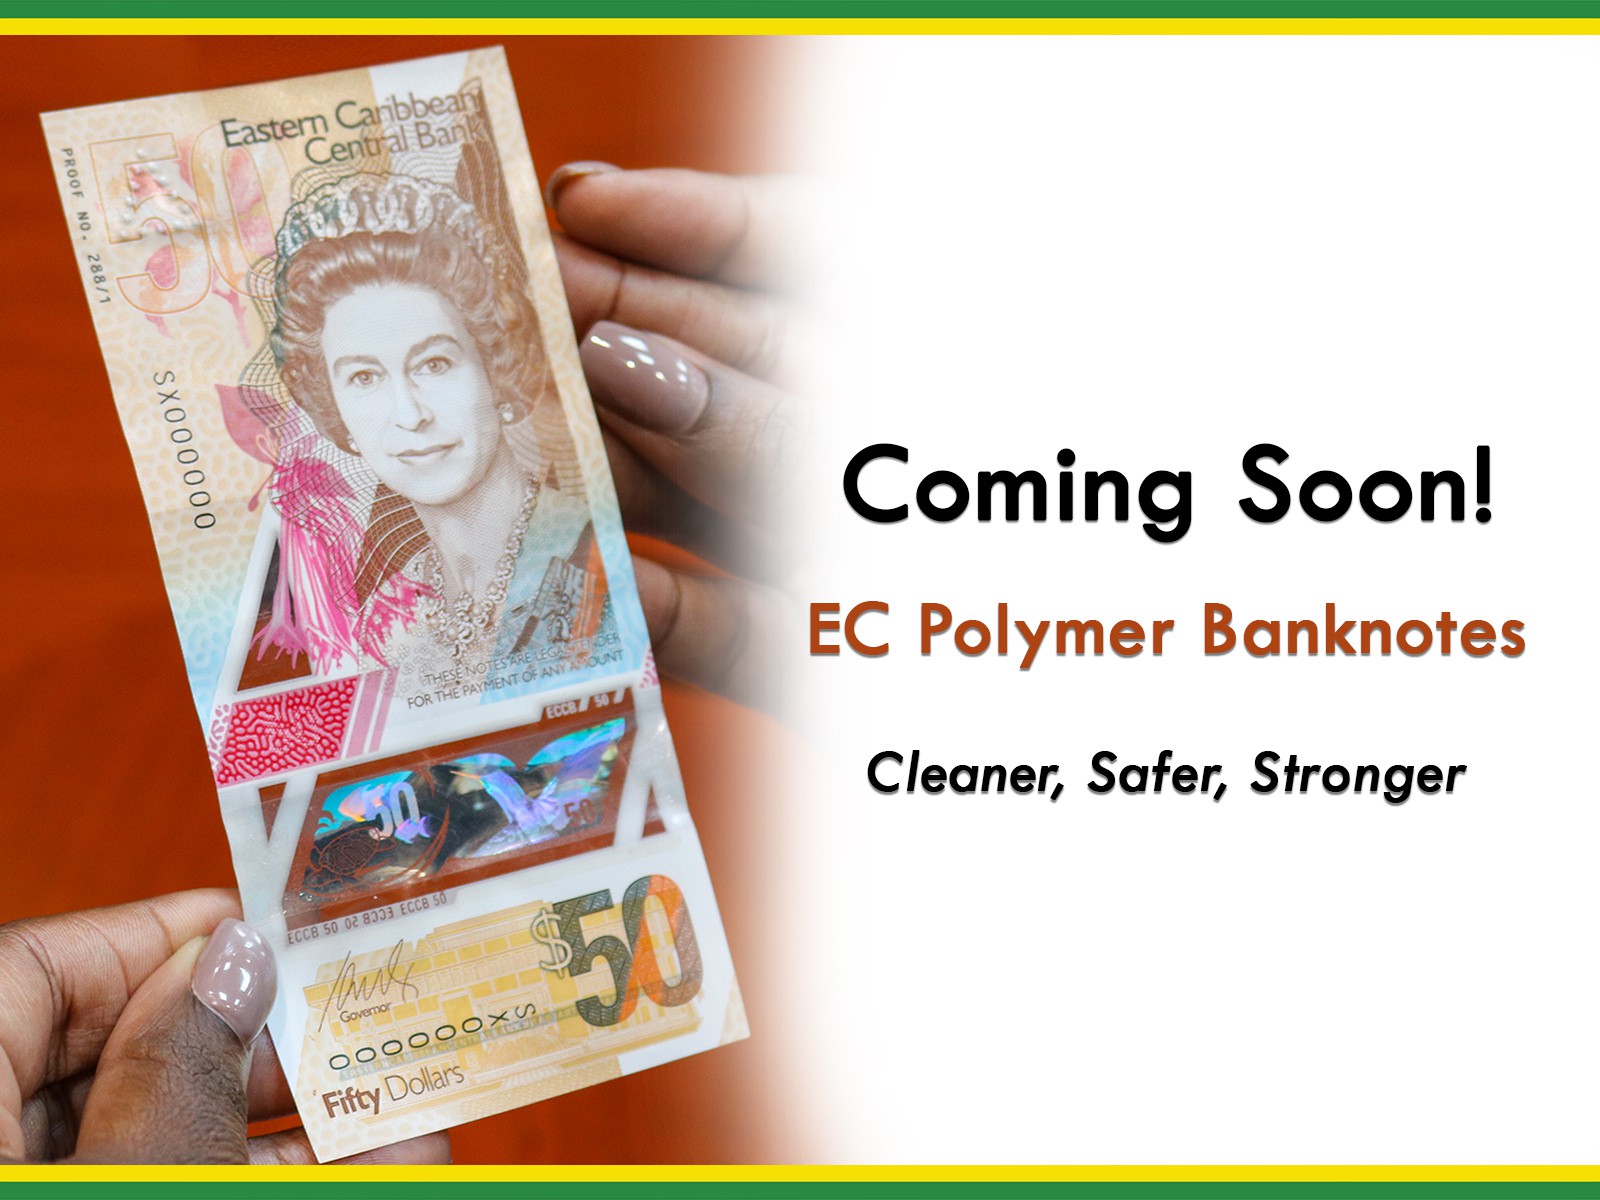  Eastern Caribbean Central Bank Polymer  Banknotes Coming Soon